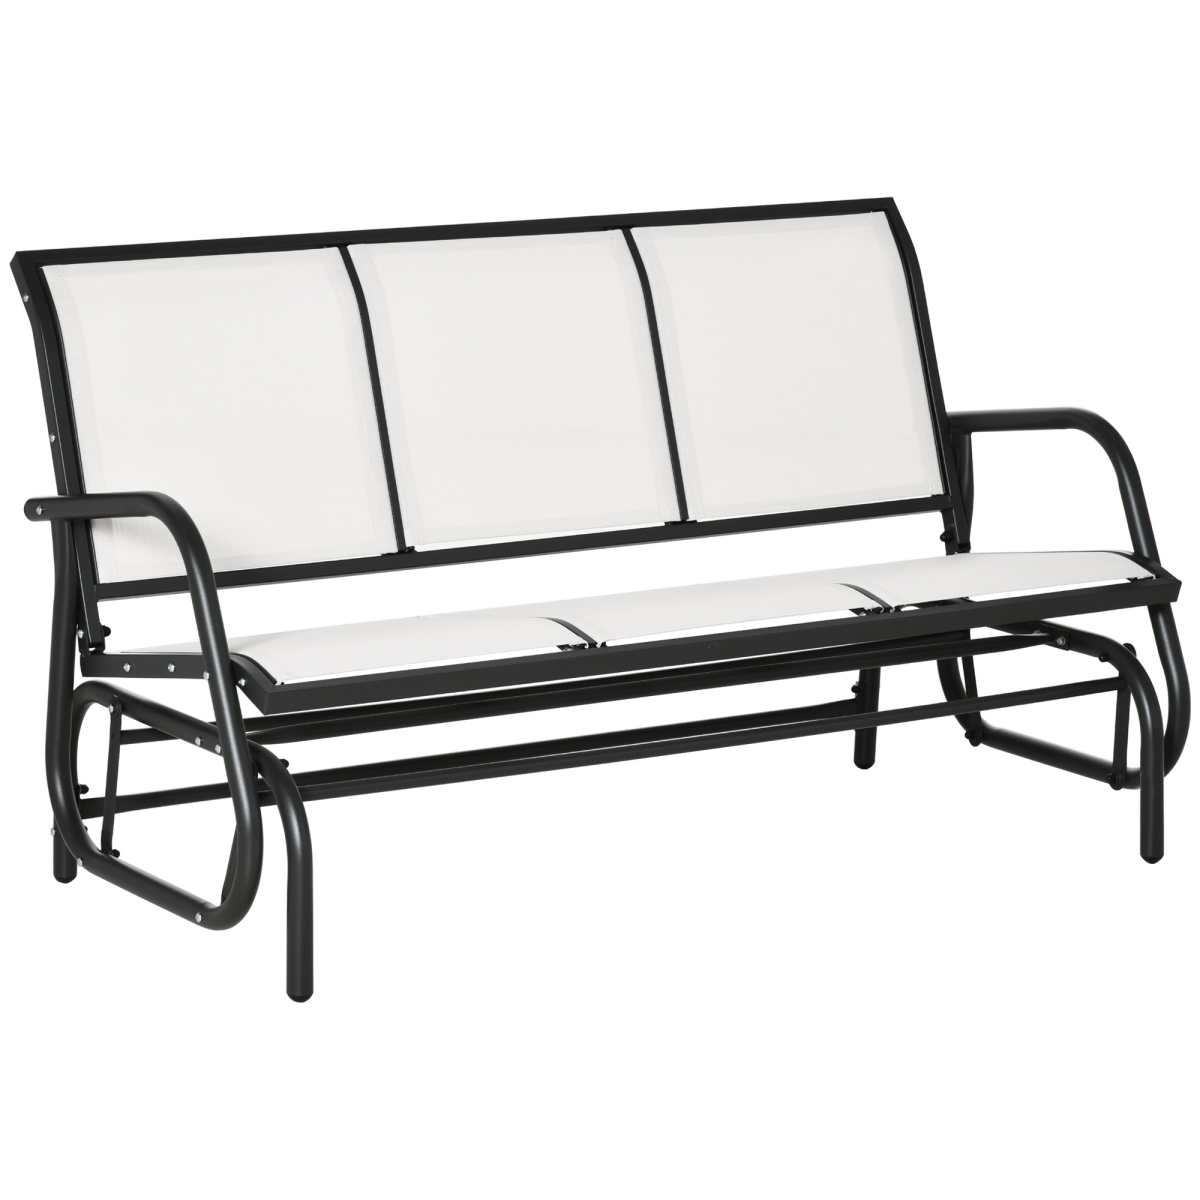 212 Main 84B-531CW Outsunny 3-Person Patio Glider Bench&#44; Outdoor Porch Glider Swing with 3 Seats&#44; Breathable Mesh Fabric & Metal